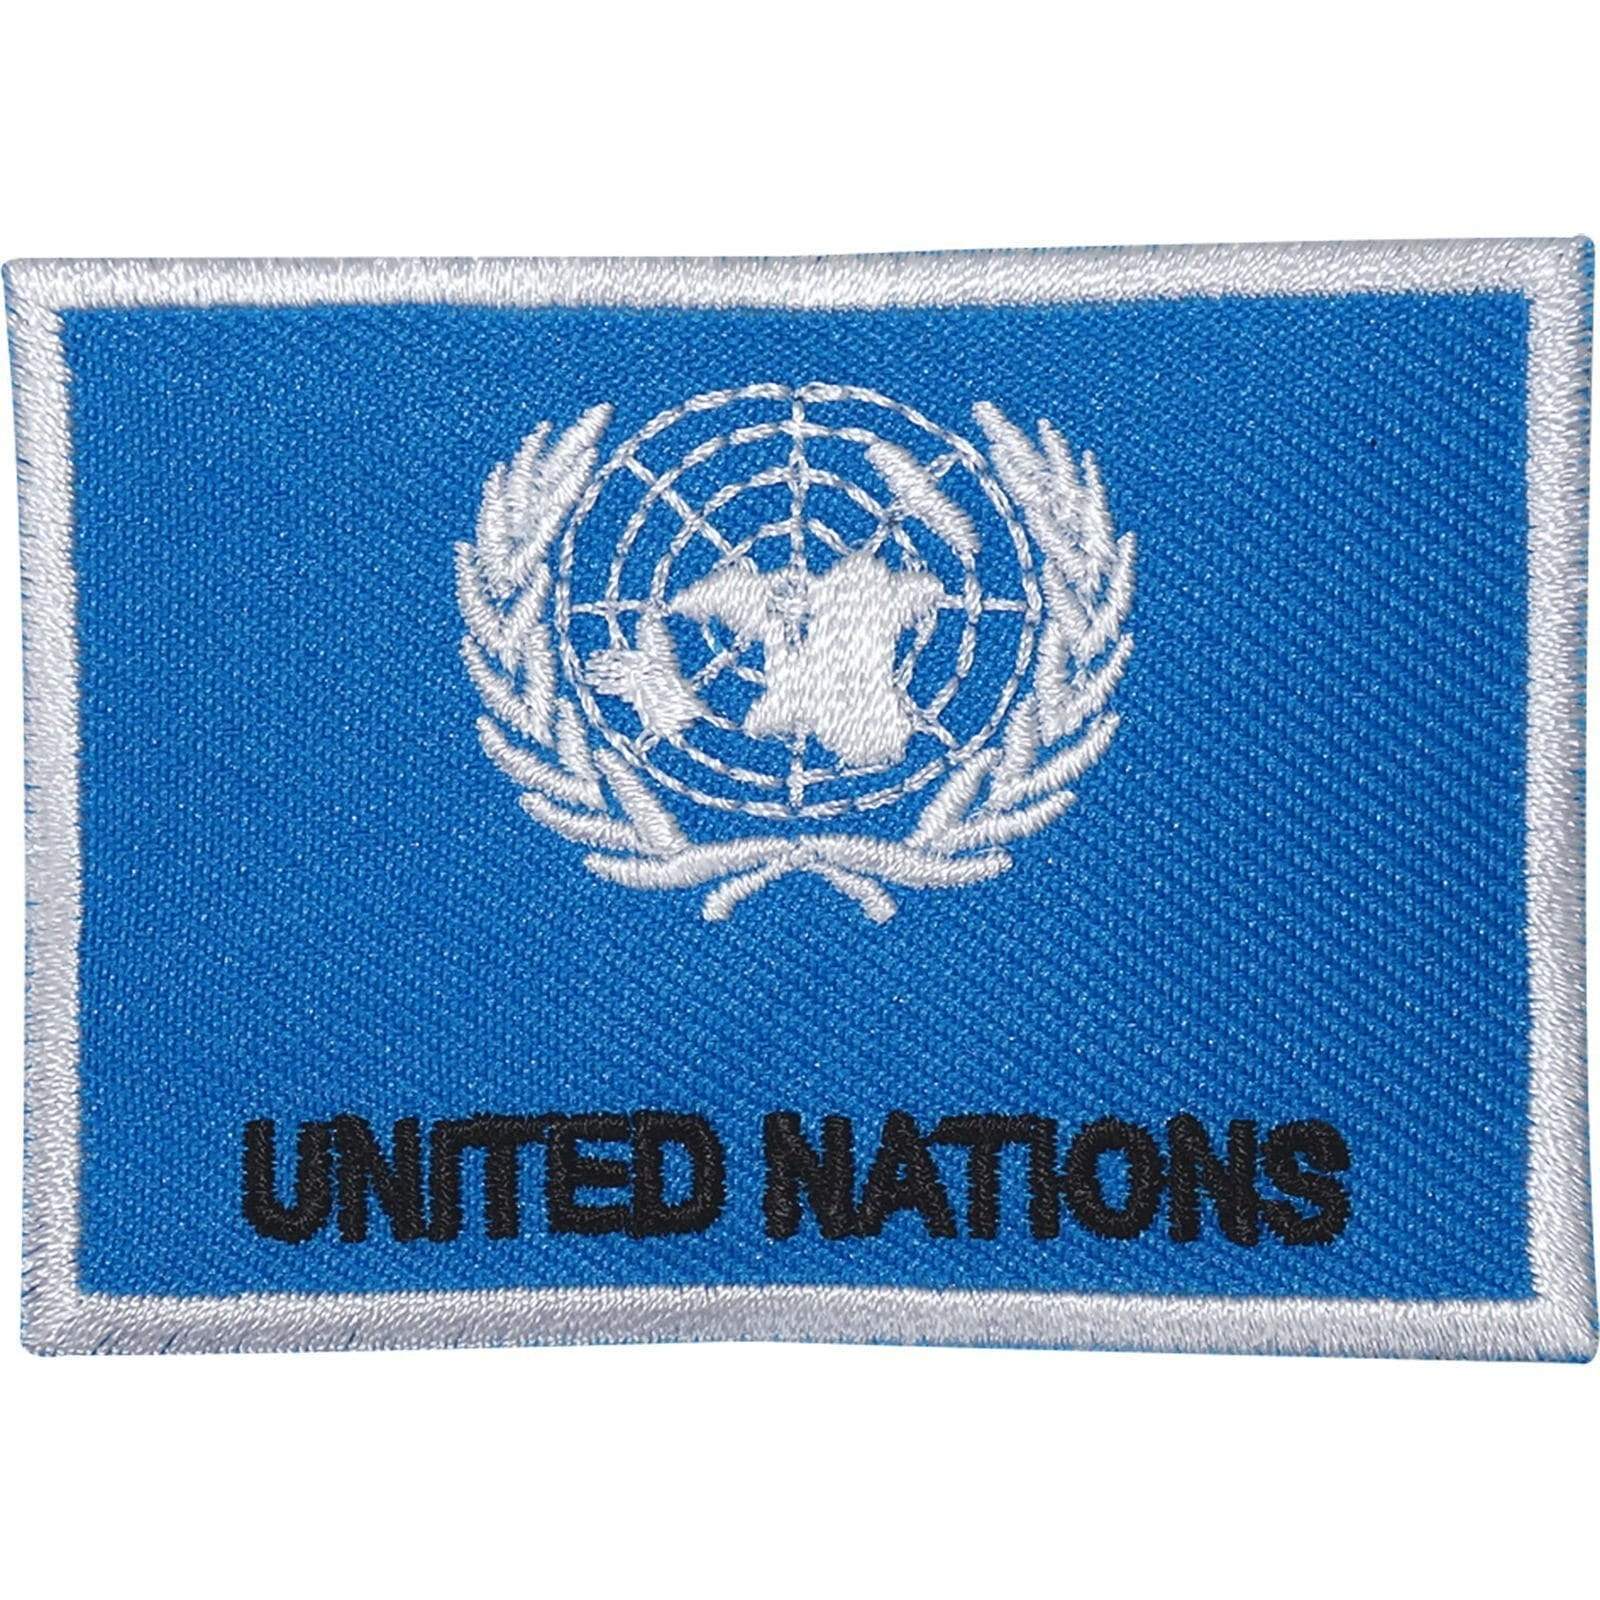 United Nations Flag Embroidered Iron Sew On Patch Army Military Embroidery Badge